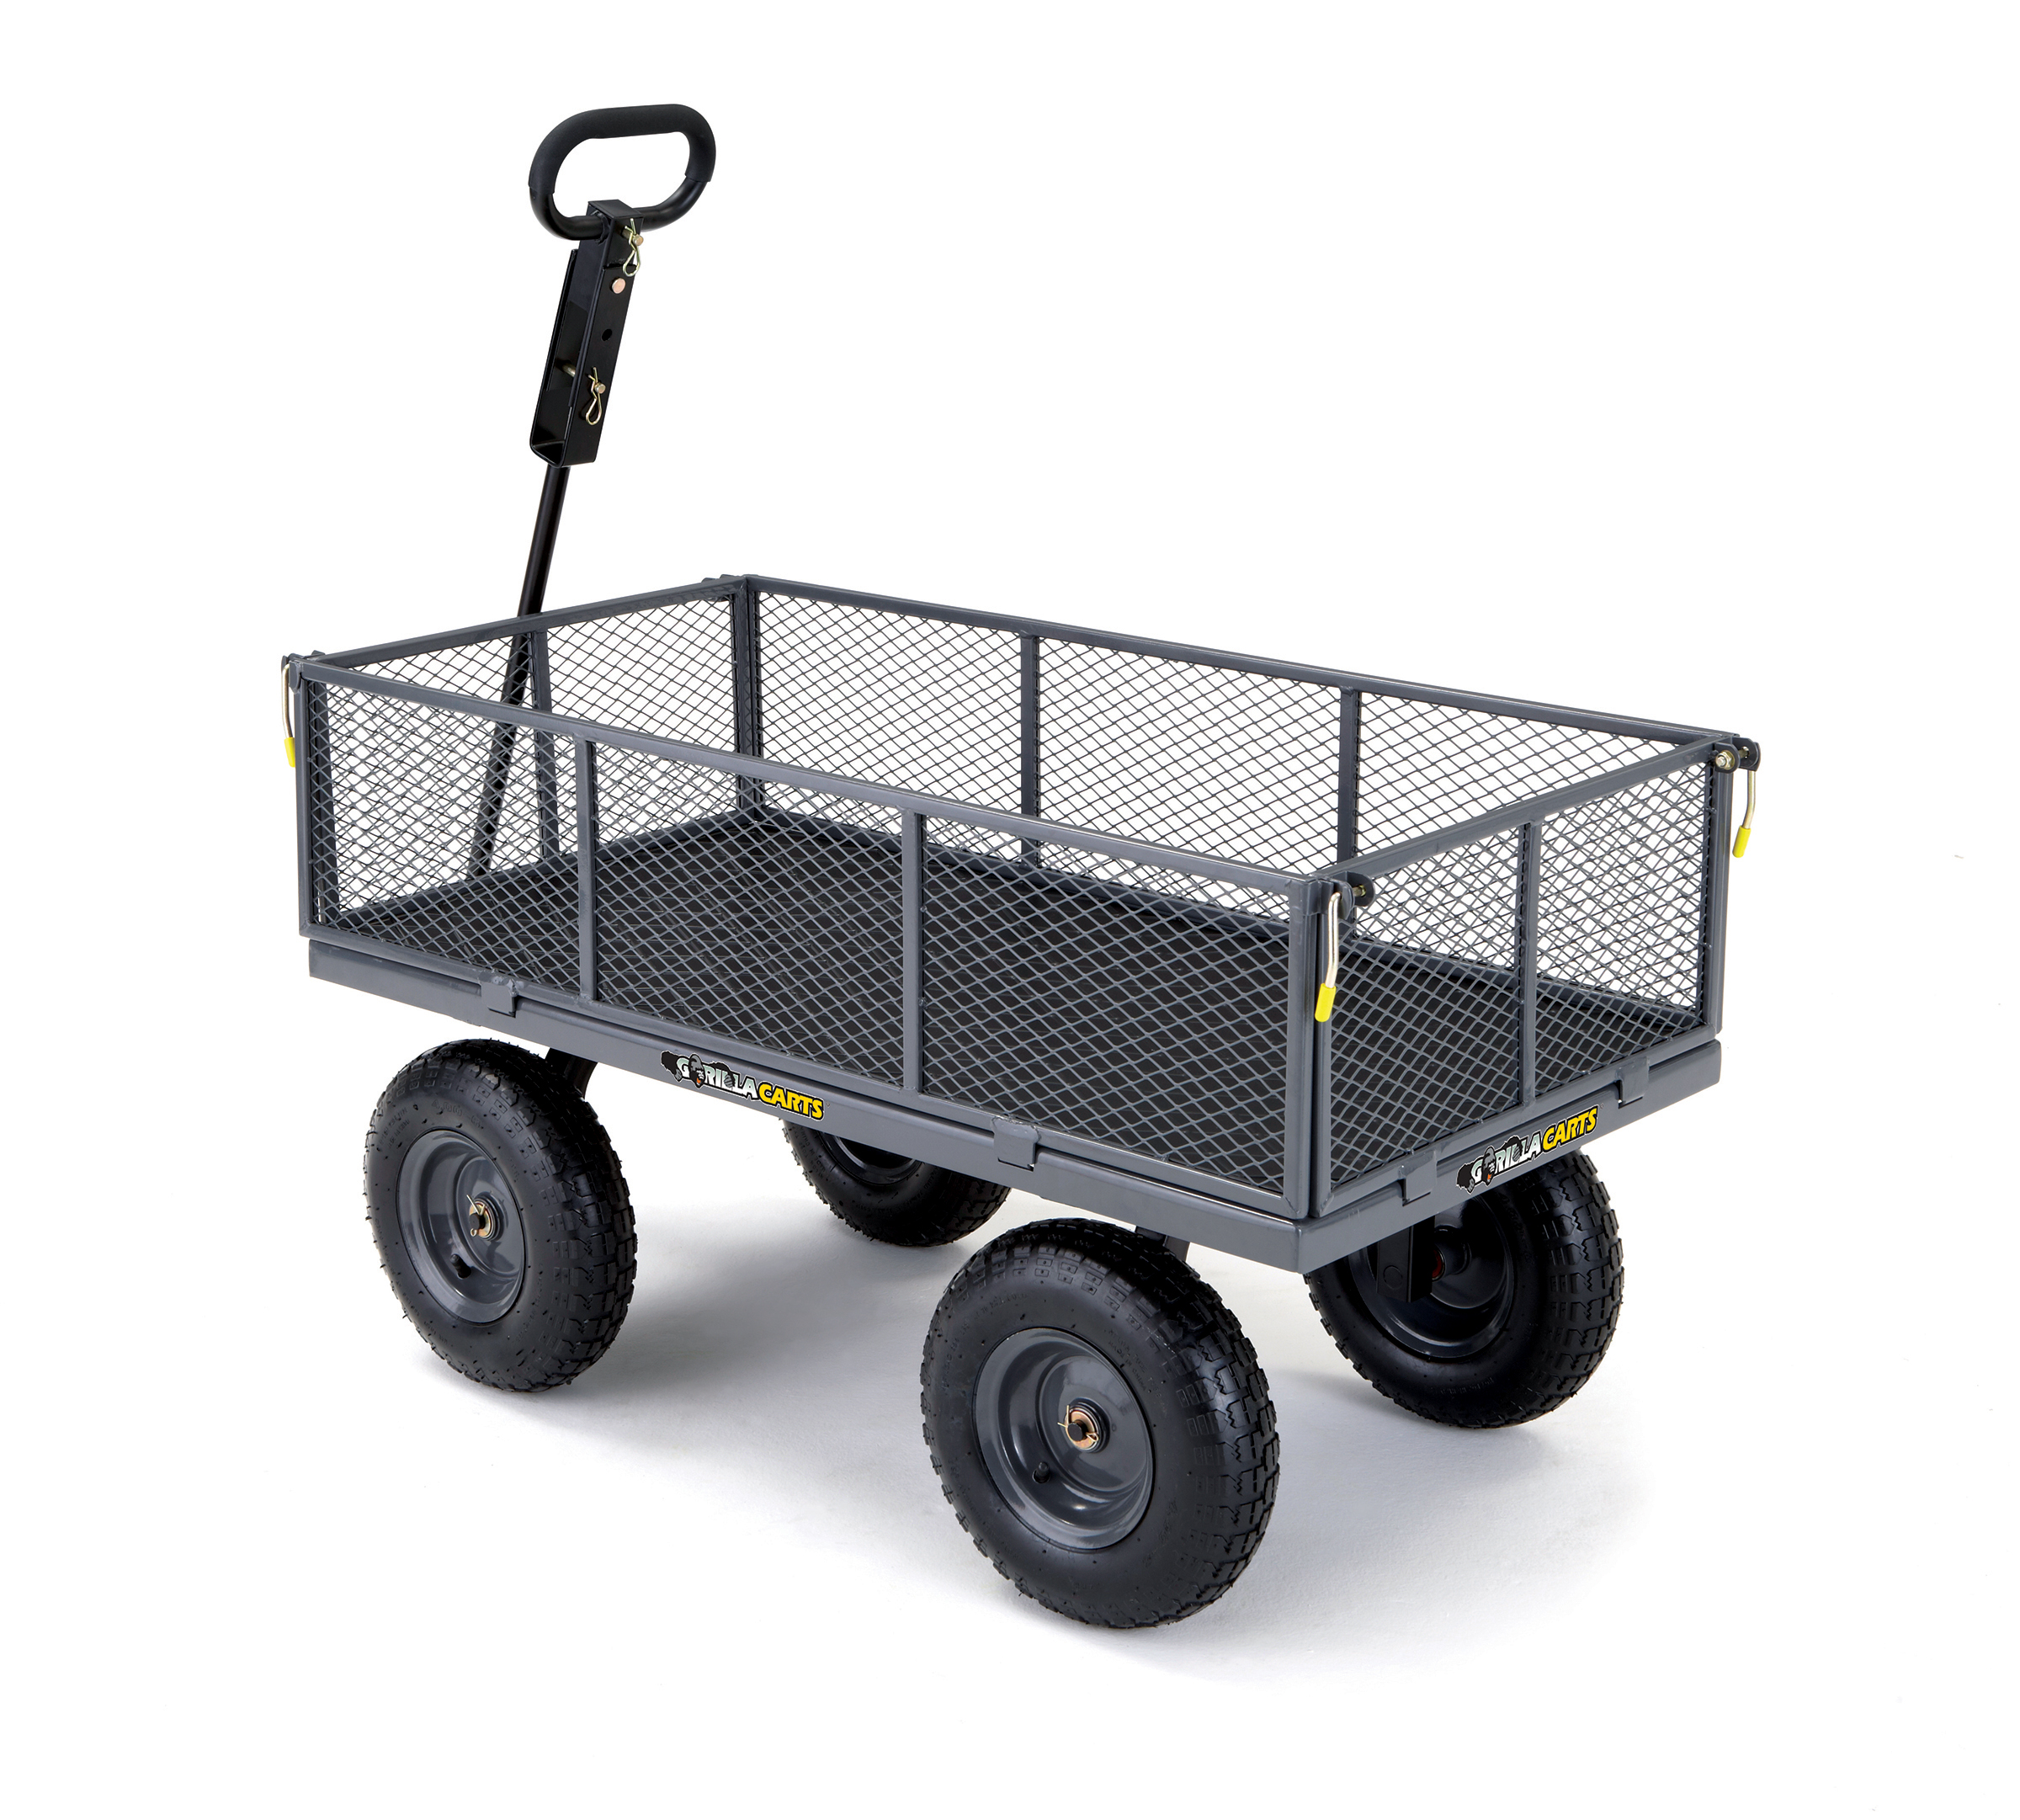 1000-lbs Gorilla Carts GOR1001-COM Heavy-Duty Steel Utility Cart with Removable Sides Gray & Mac Sports Mac Wagon Capacity Red WTC-109 